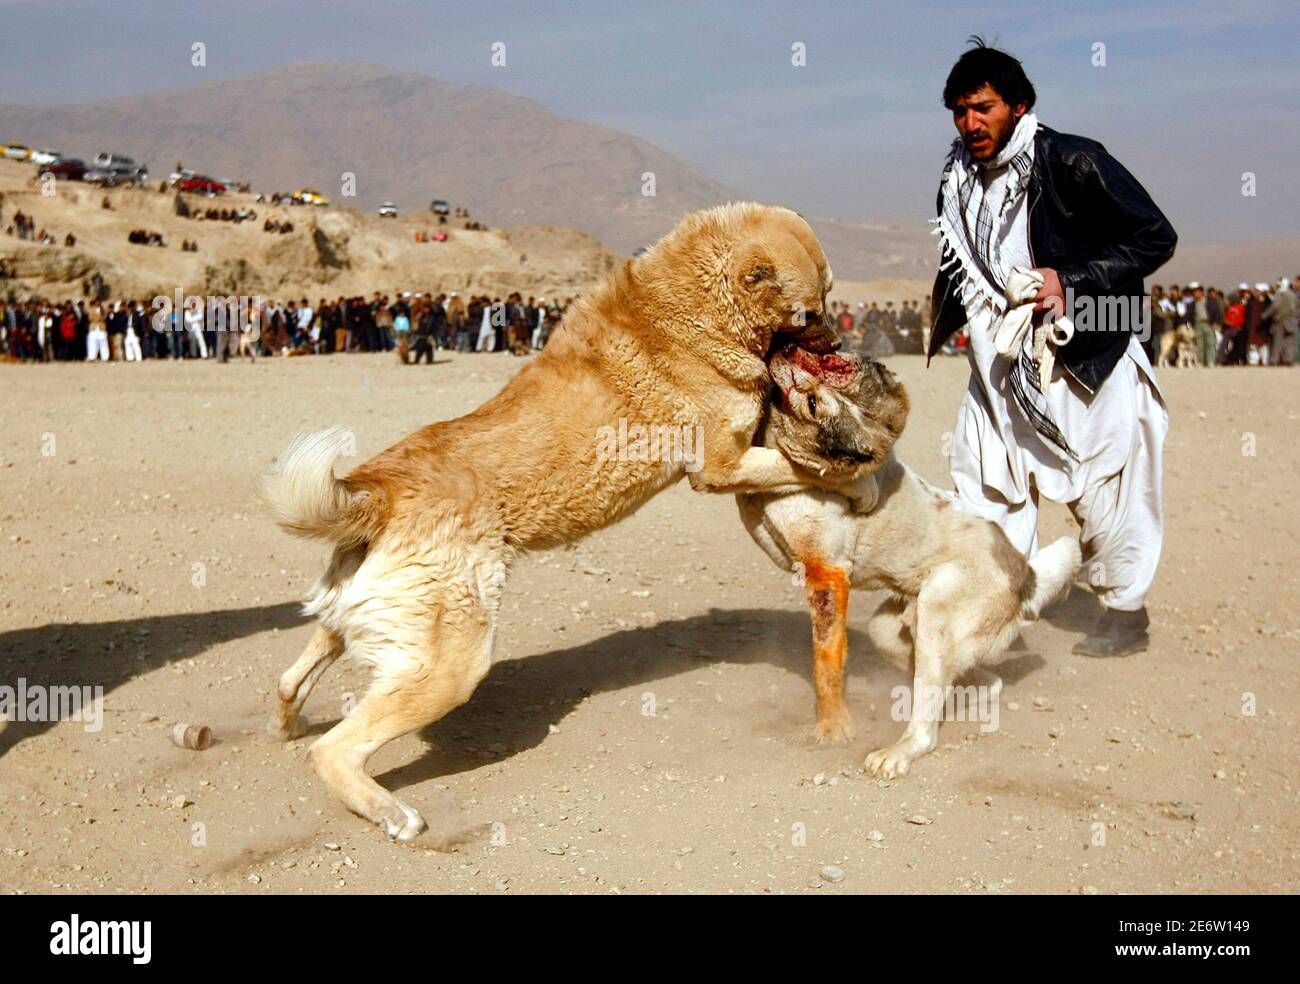 Dogs fight during the traditional dog fighting competition in Kabul January  15, 2010. REUTERS/Omar Sobhani (AFGHANISTAN - Tags: ANIMALS SOCIETY IMAGES  OF THE DAY Stock Photo - Alamy